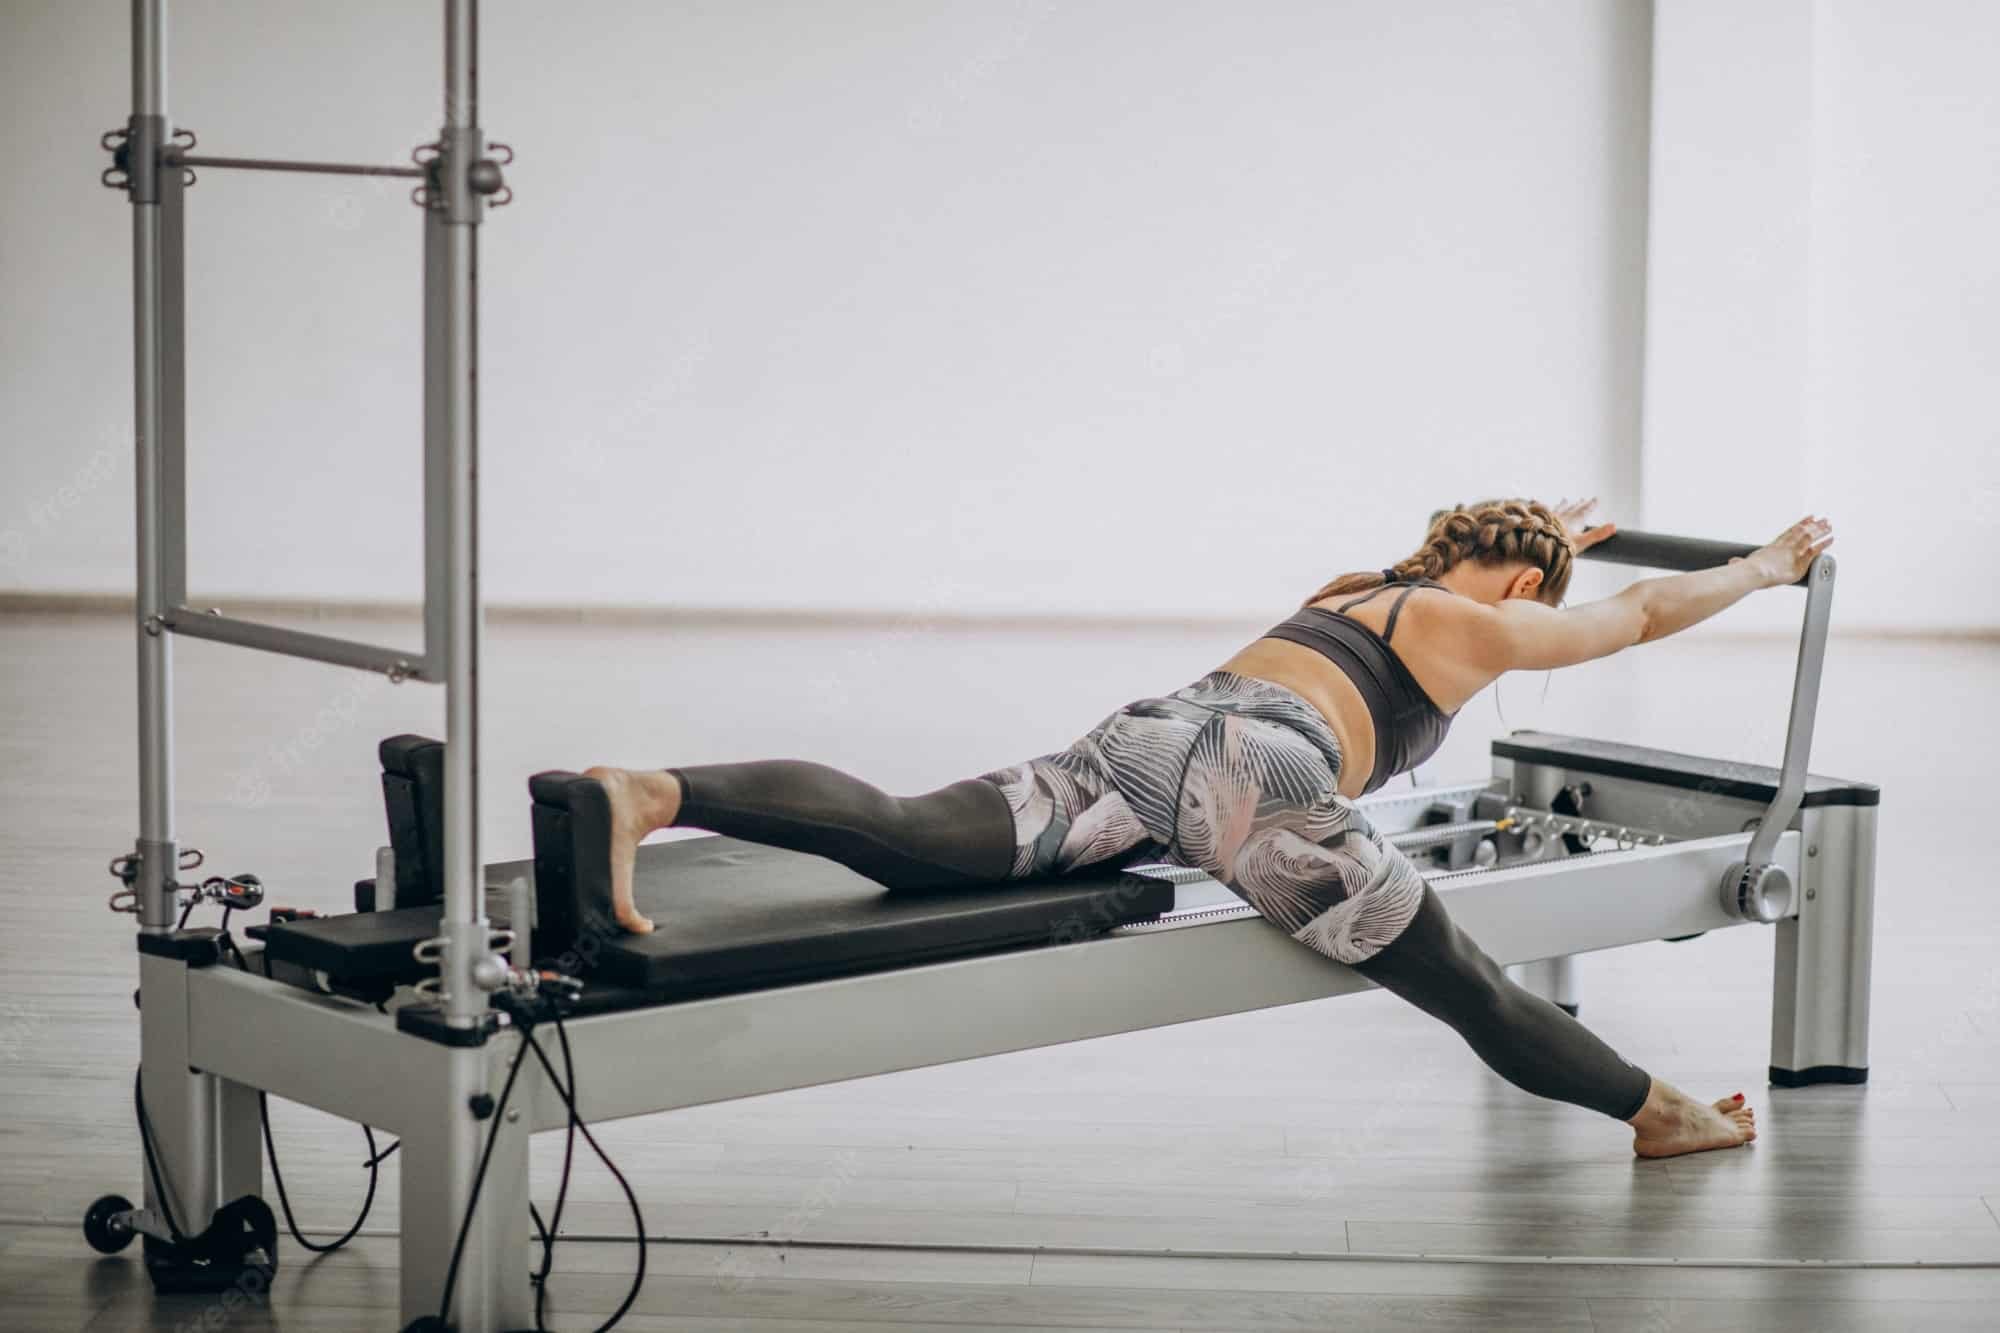 What's better for toning? Pilates, Reformer, Yoga or Weight Lifting?